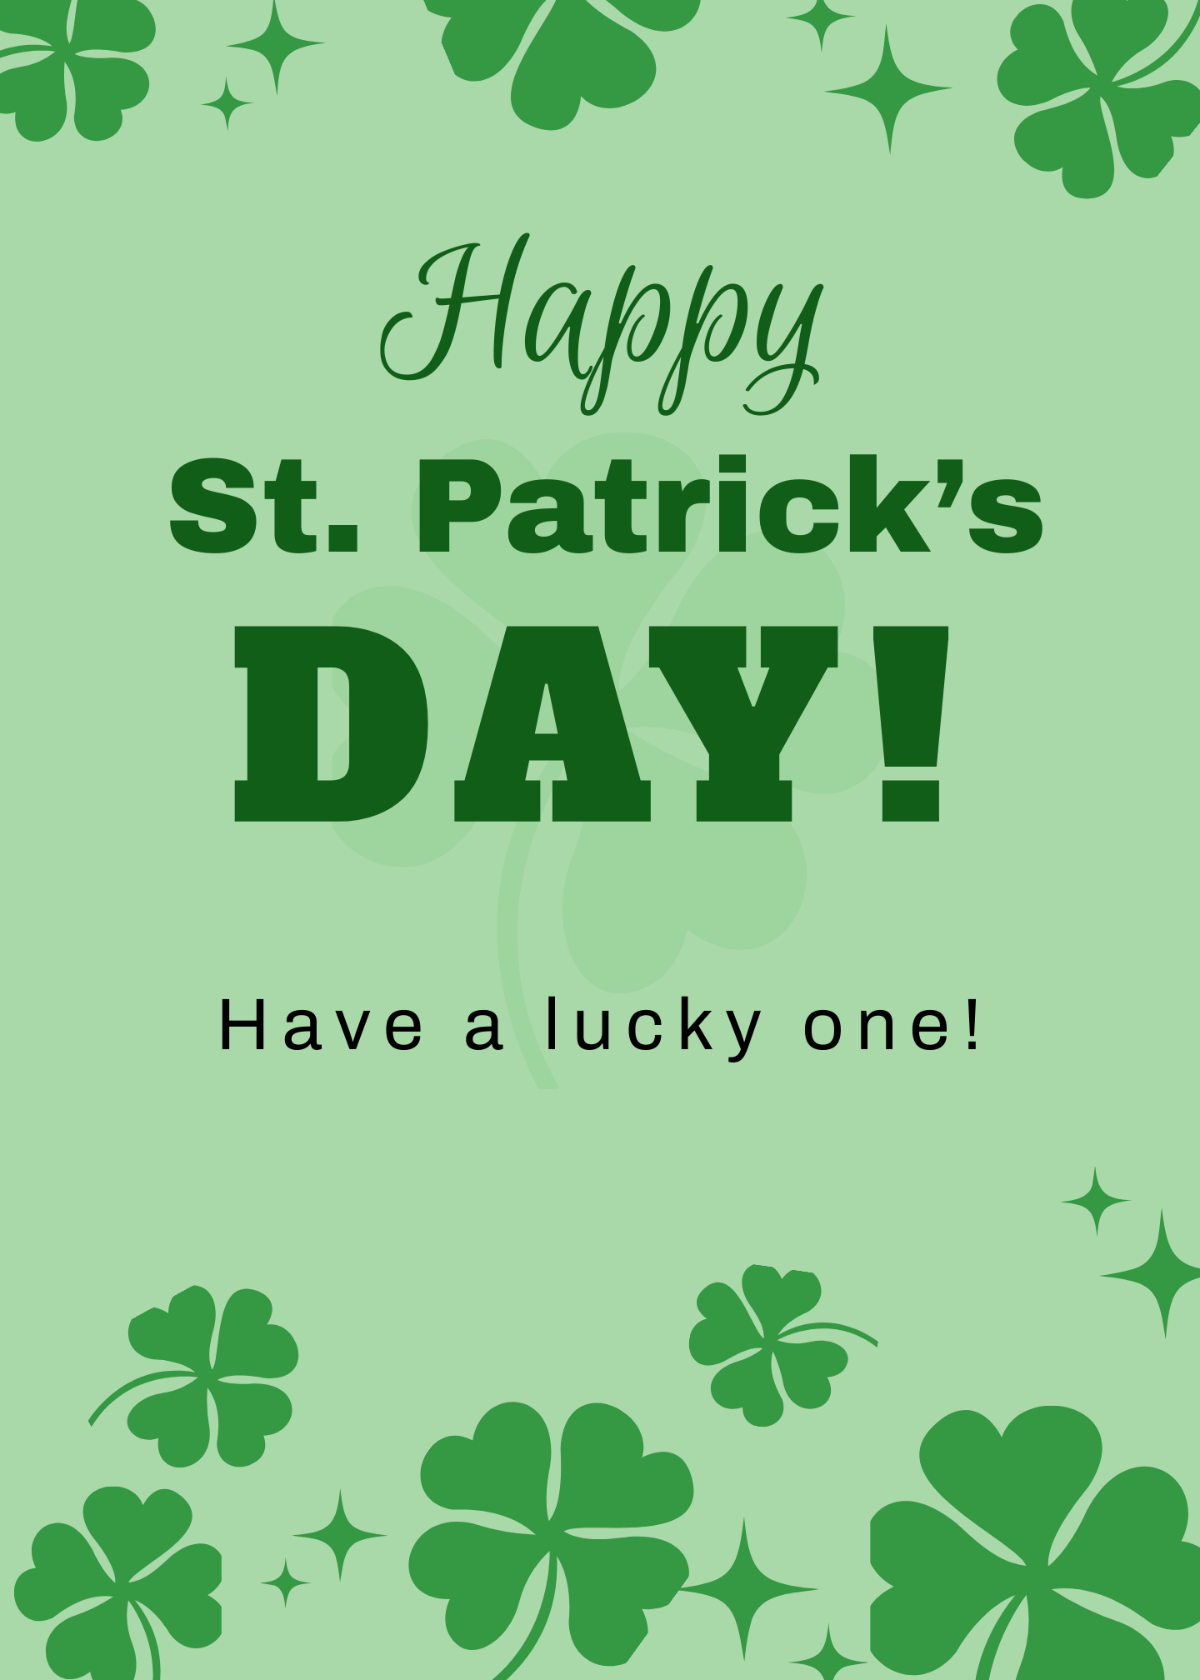 Free St. Patrick's Day Greeting Template